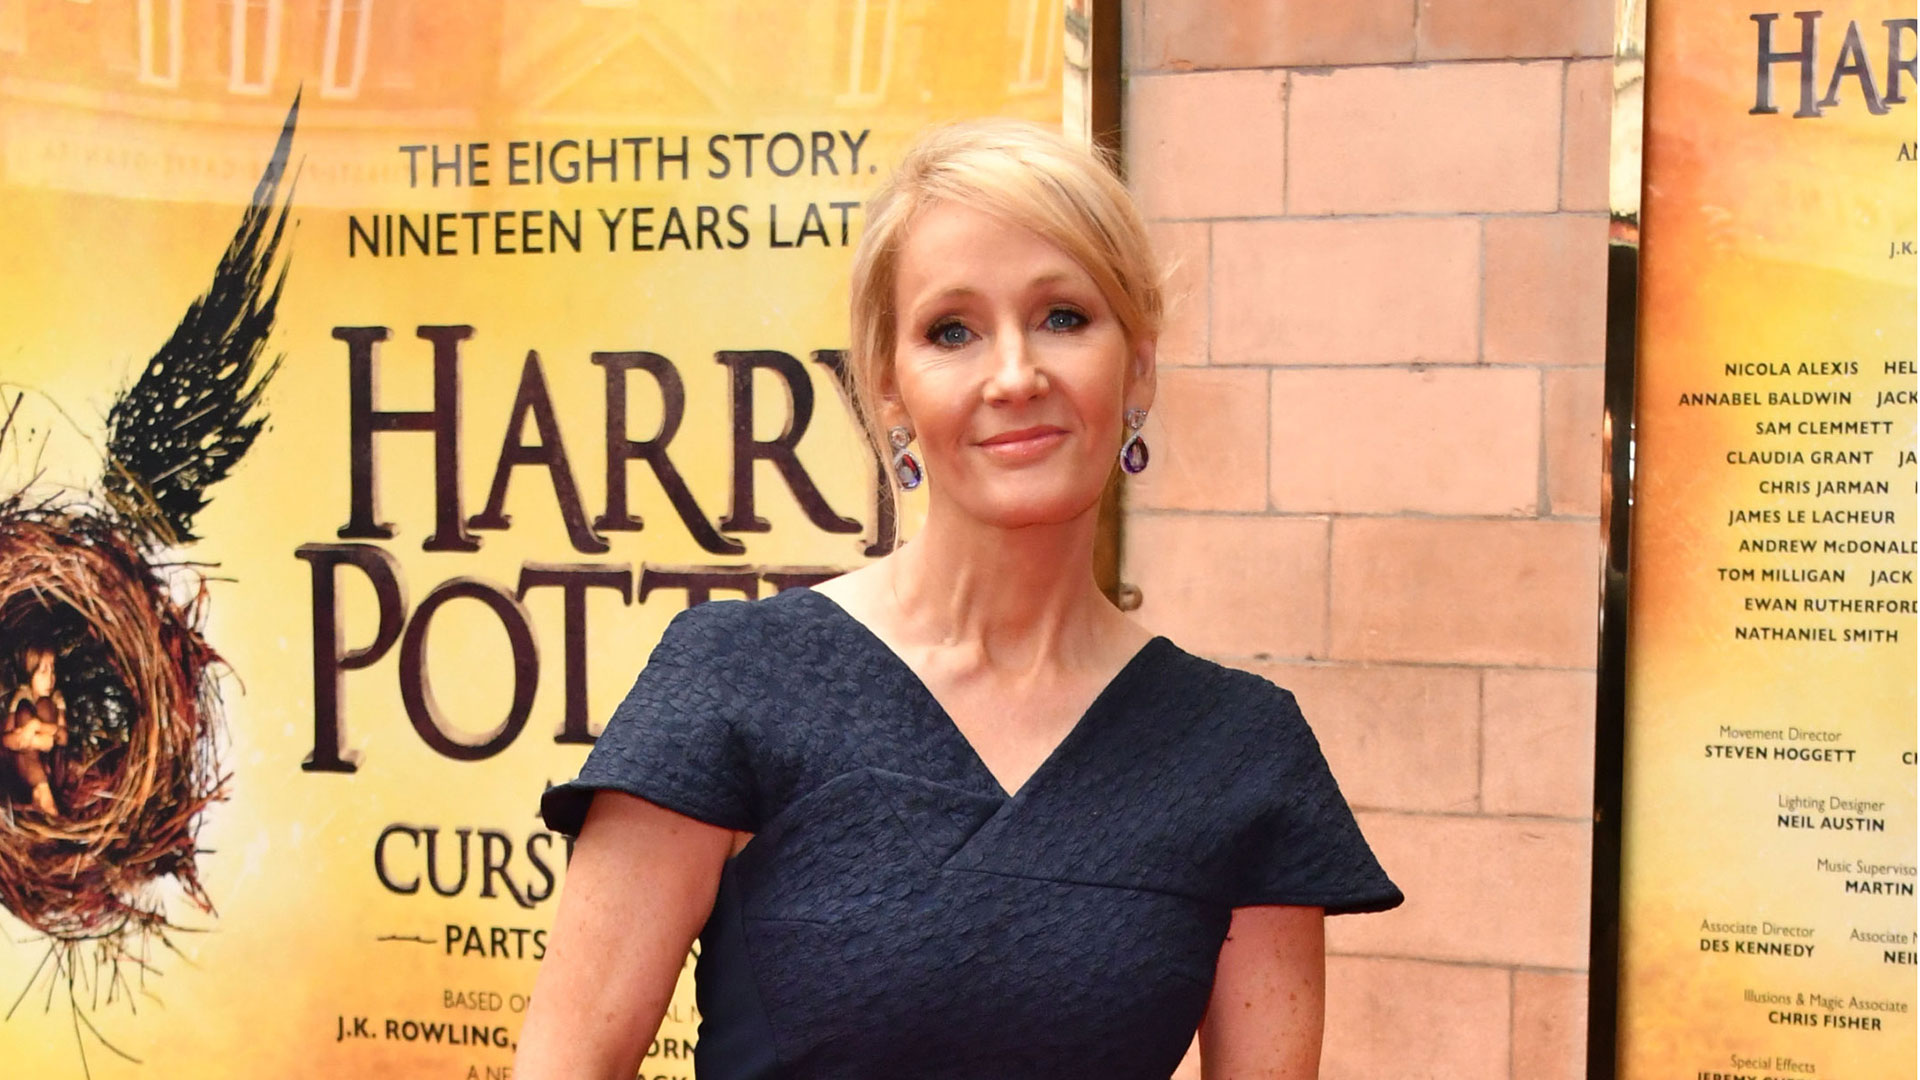 J.K. Rowling From Single Mom To The World’s Most Successful Author | How Did She Changed The World